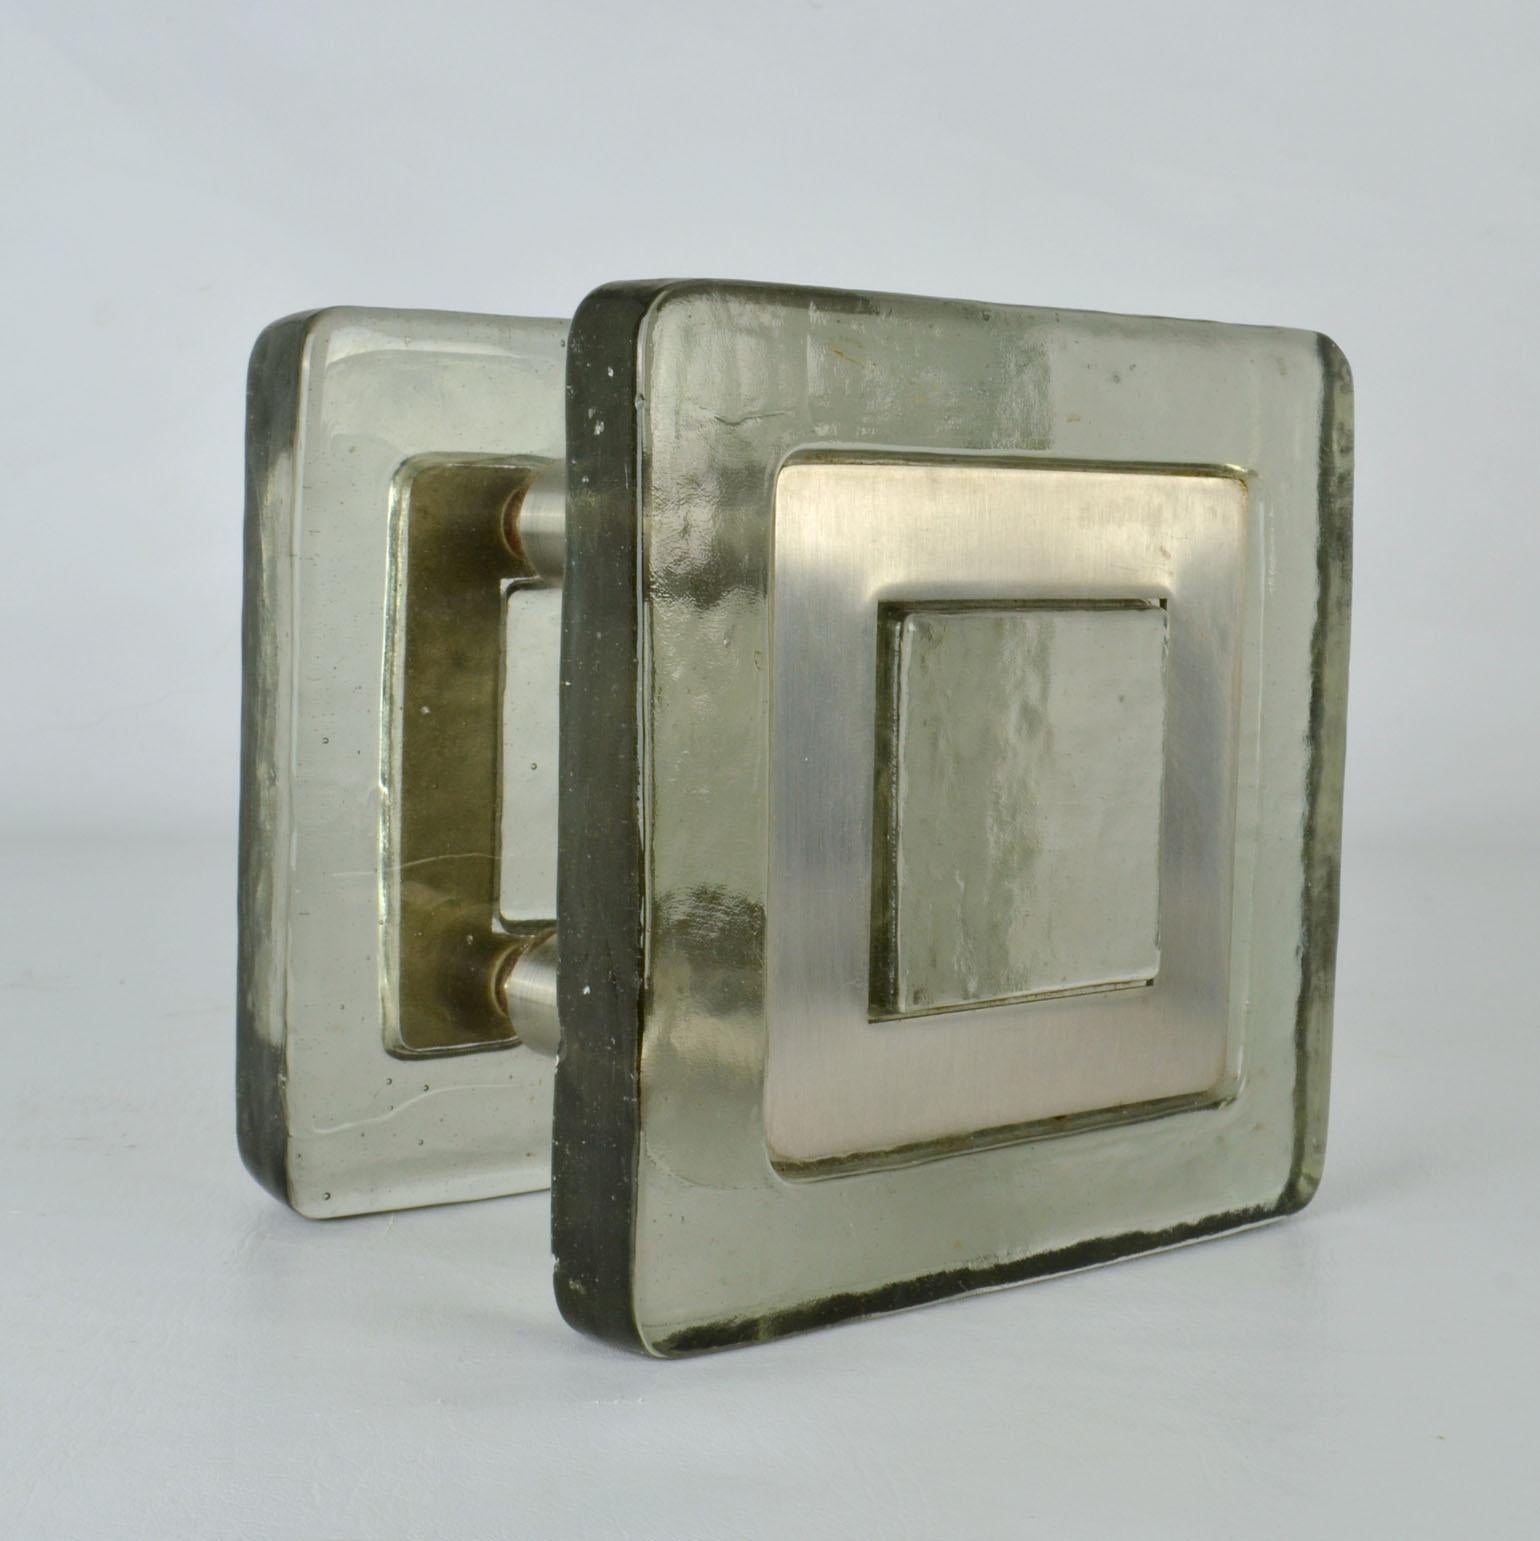 Minimalist Pair of Architectural Square Tinted Glass Push Pull Door Handles